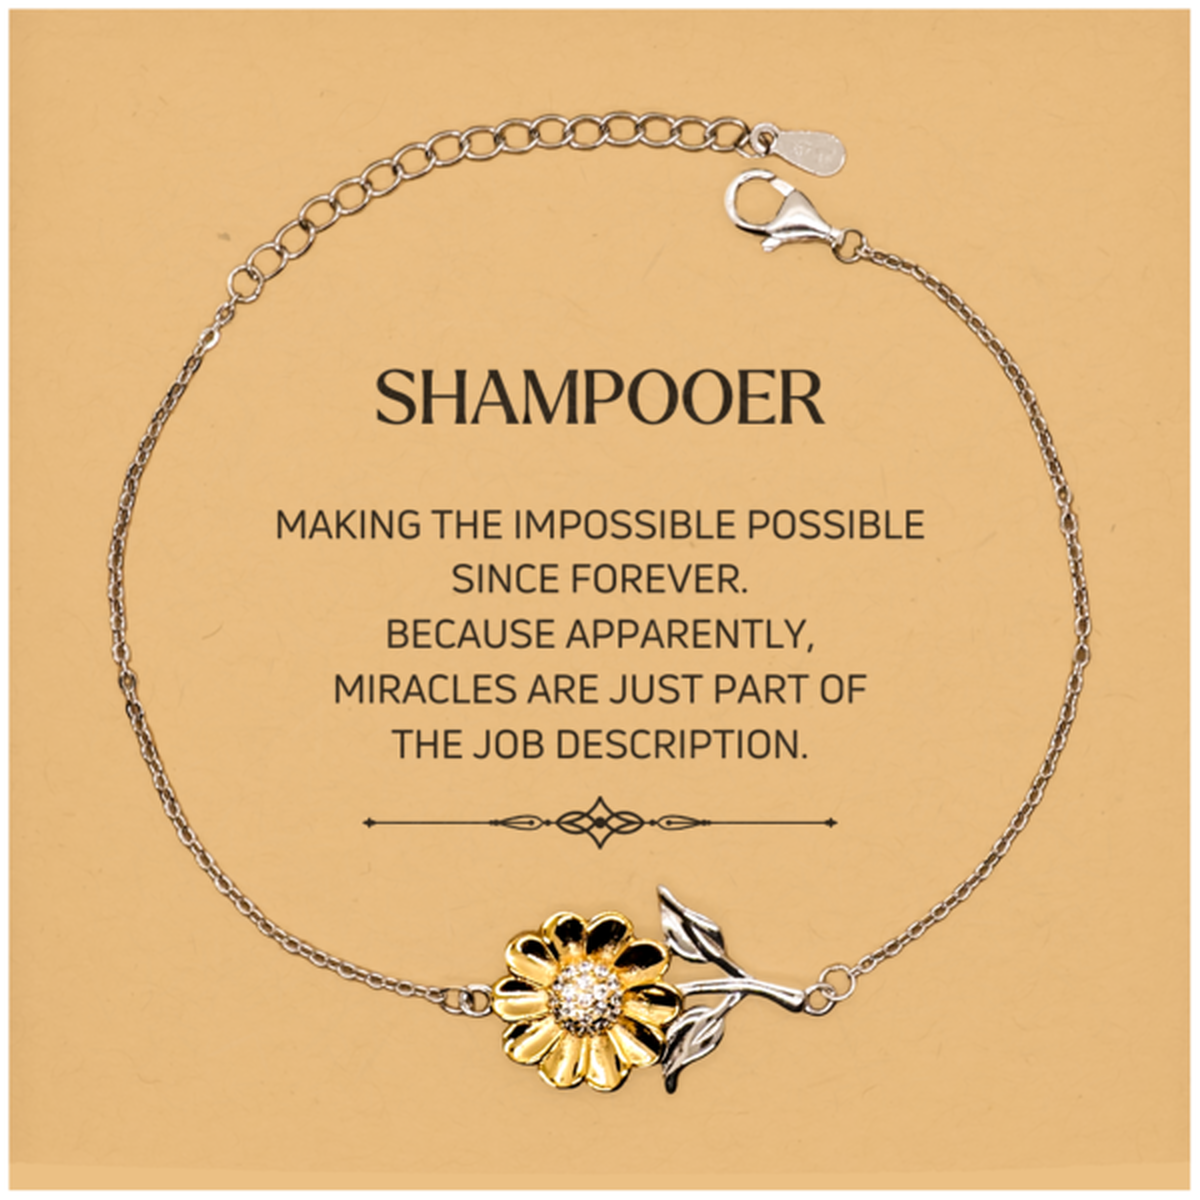 Funny Shampooer Gifts, Miracles are just part of the job description, Inspirational Birthday Christmas Sunflower Bracelet For Shampooer, Men, Women, Coworkers, Friends, Boss